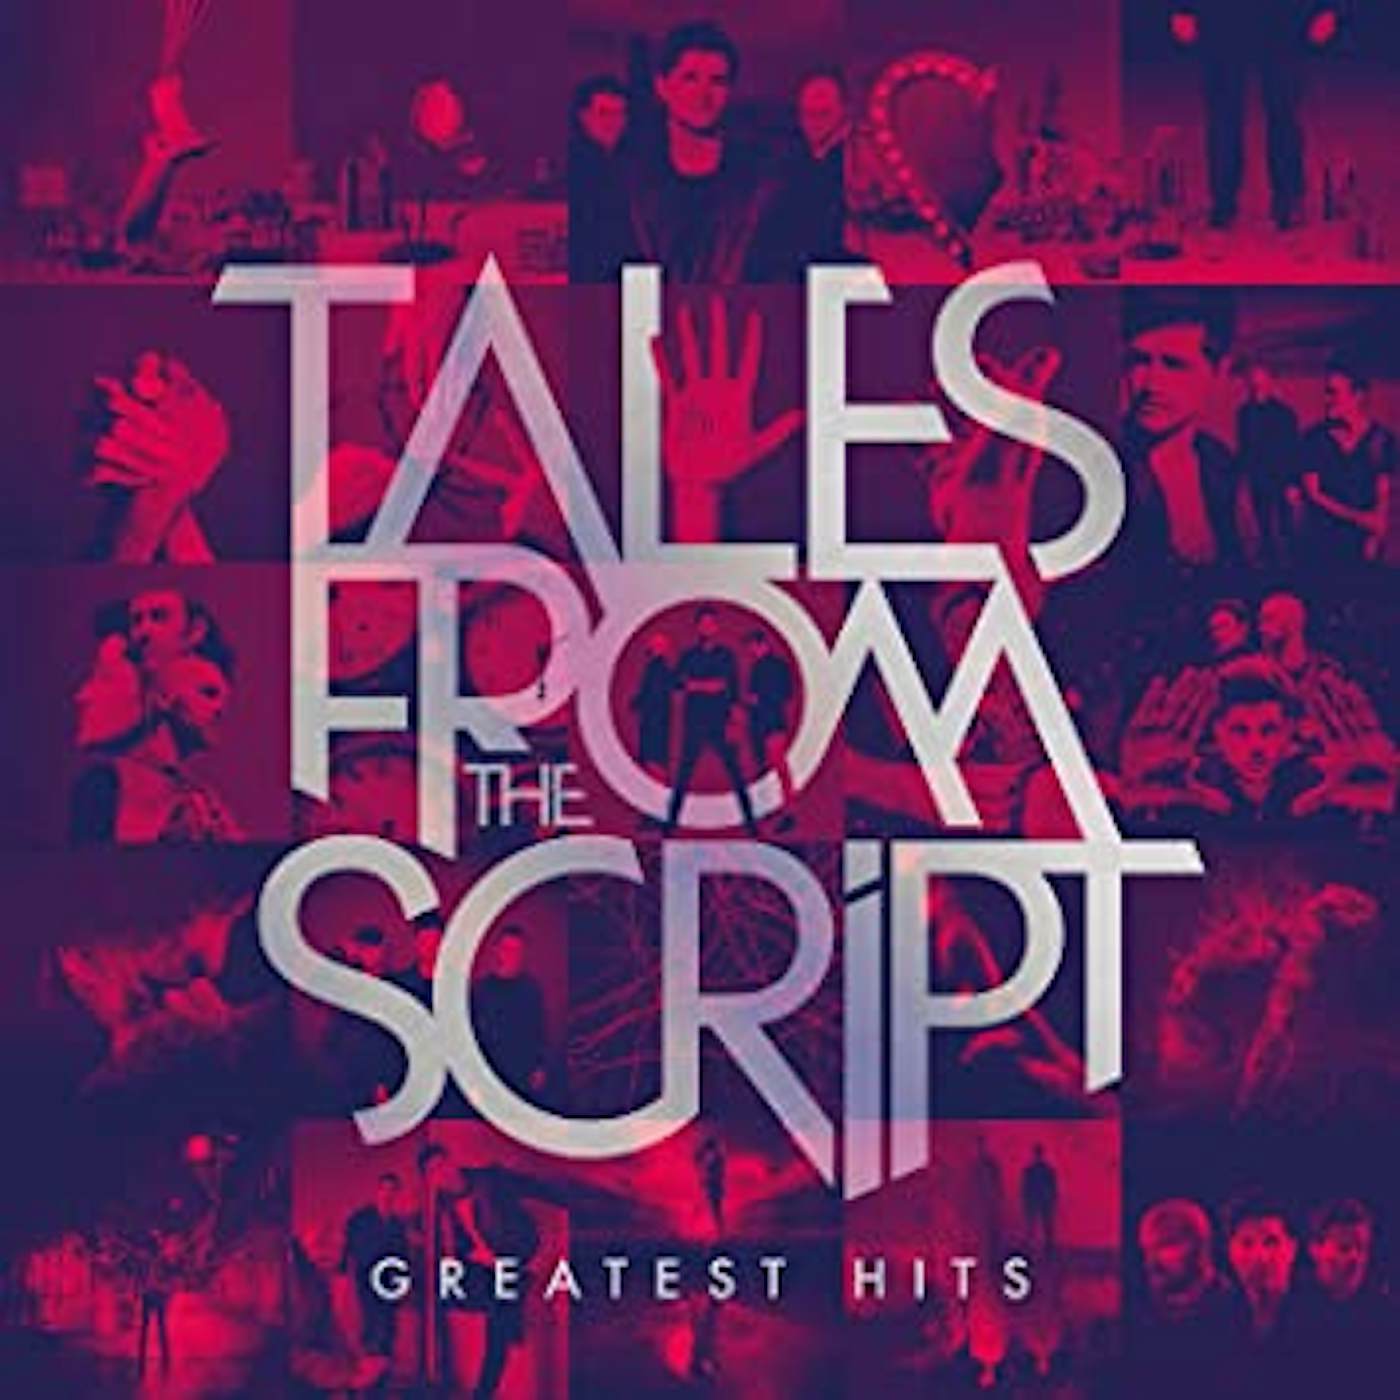 Tales from The Script: Greatest Hits Vinyl Record